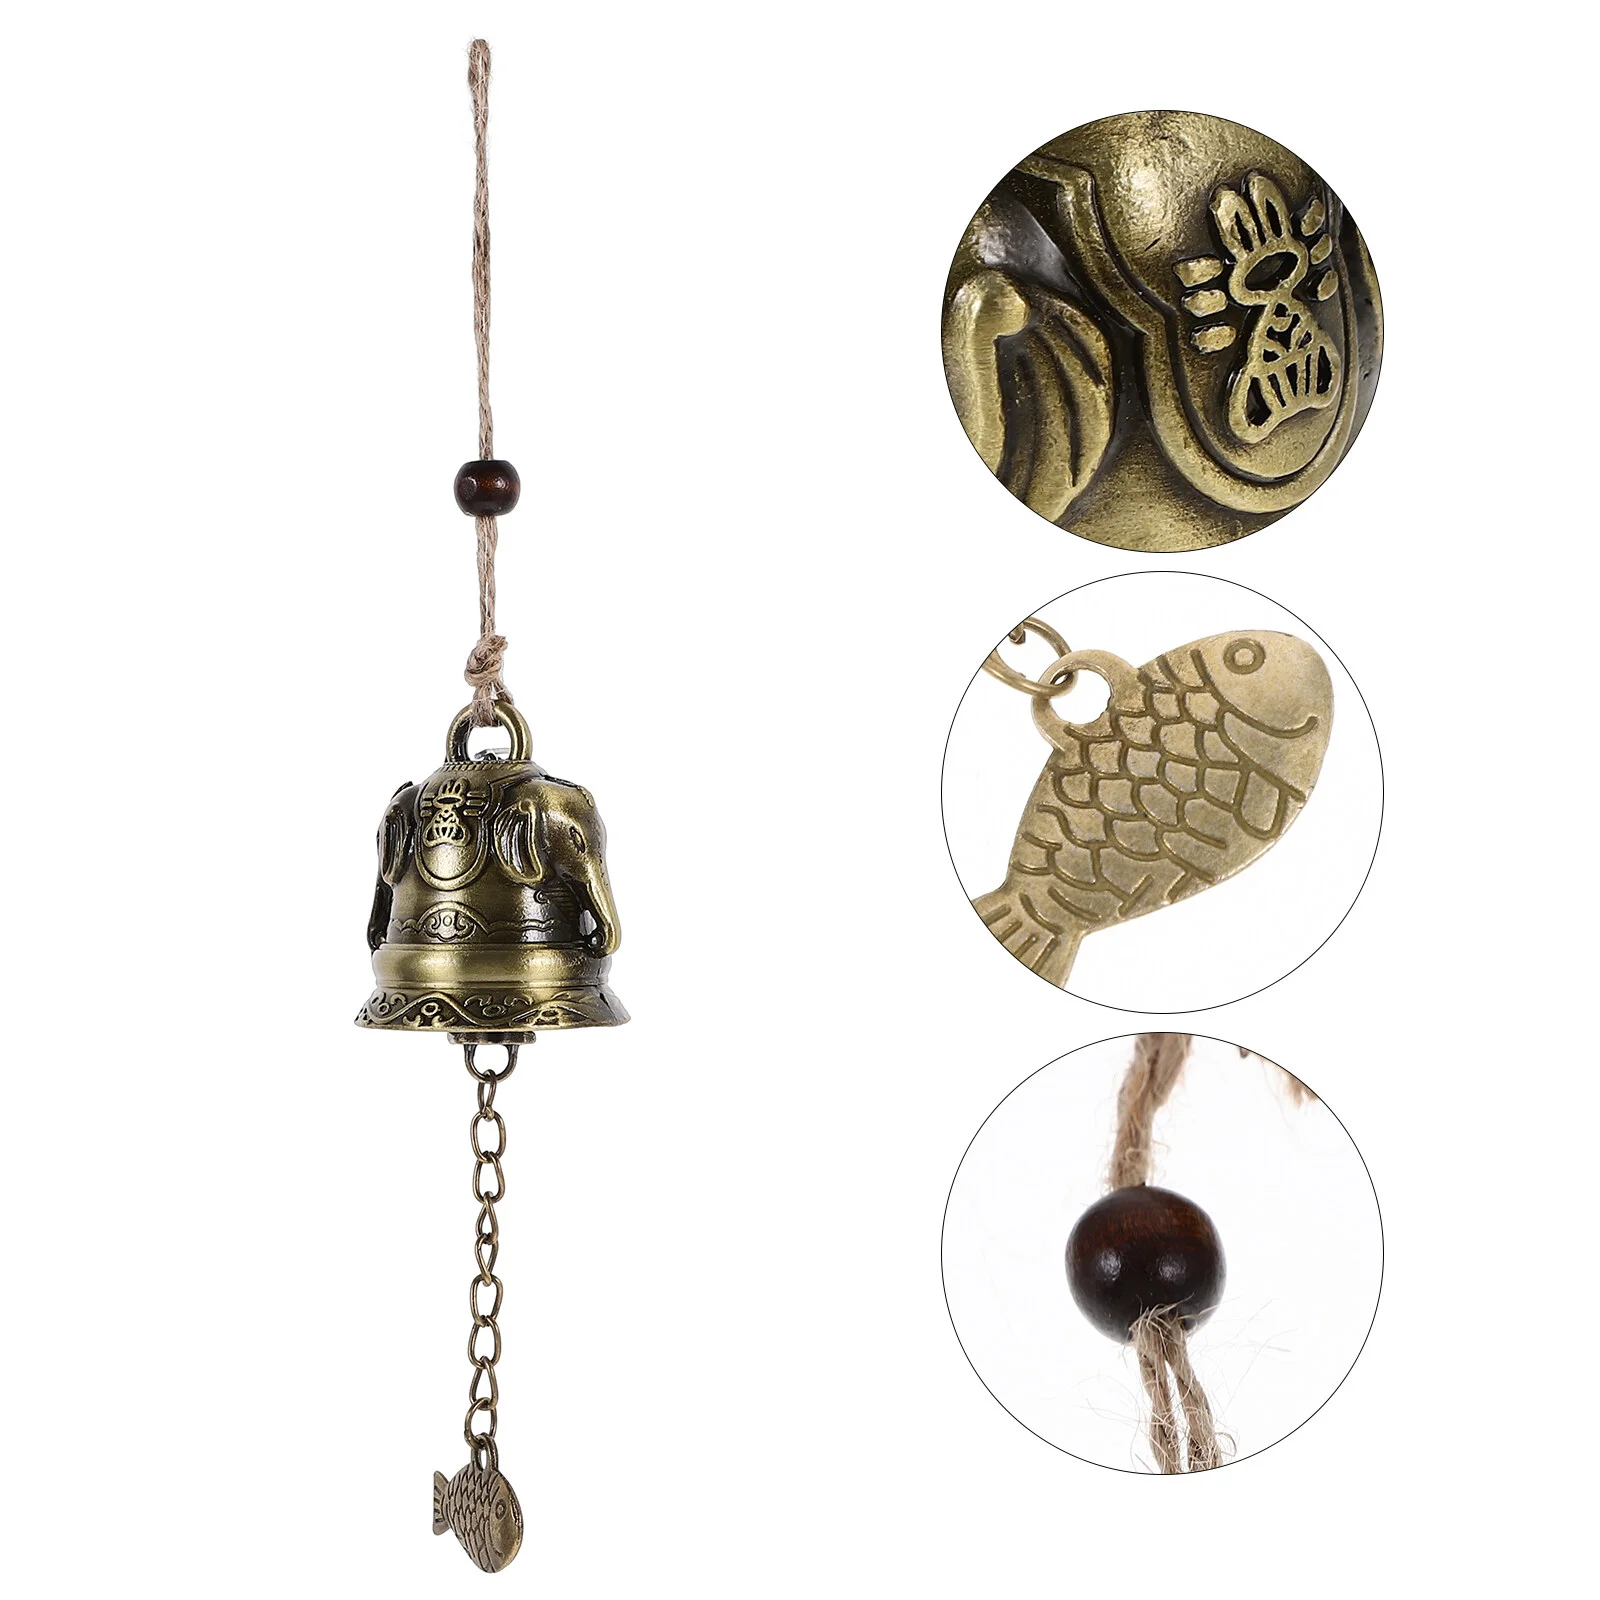 

2 Pcs Retro Japanese Decorations For Homes Garden Bell Ornament Vintage Wind Chime Balcony Household 4.2X21CM Metal Delicate